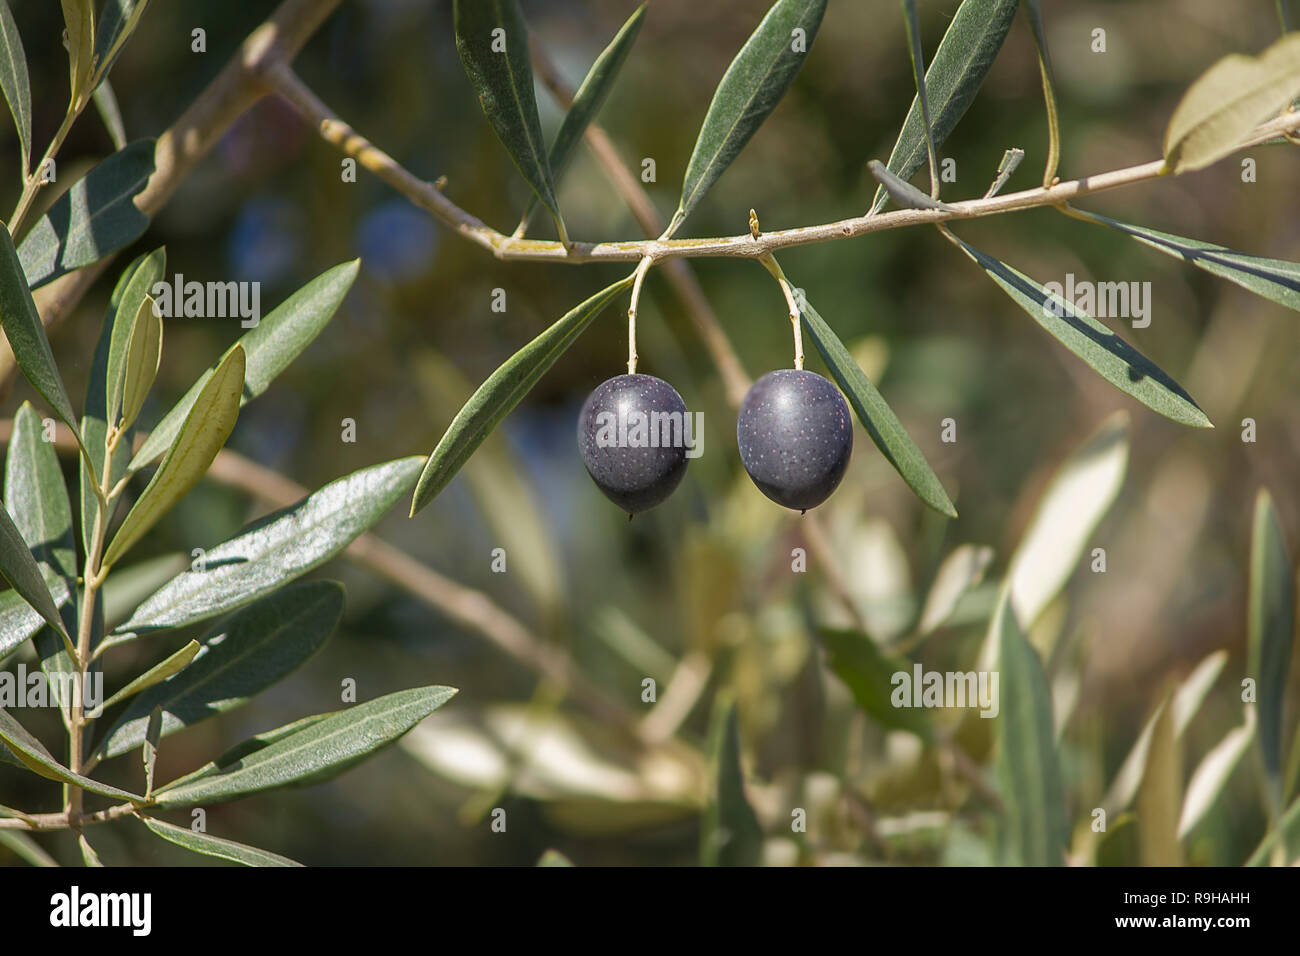 Organic Two black olives on the branch between leaves Stock Photo